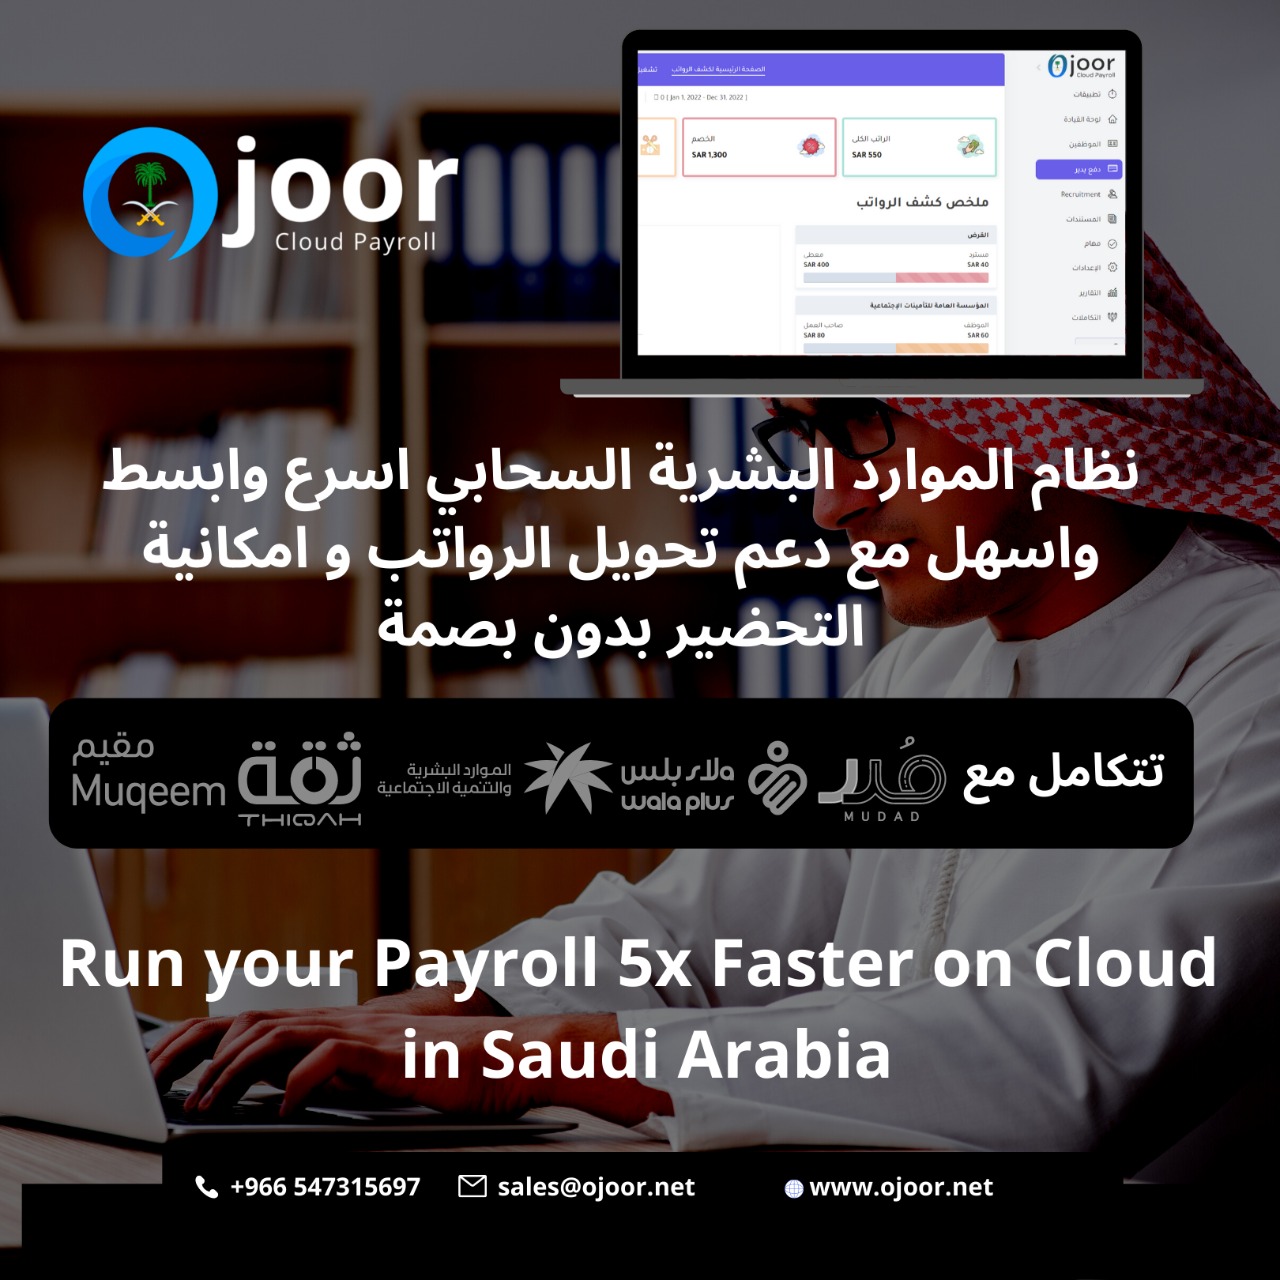 What is the automated Payroll System in Saudi Arabia?